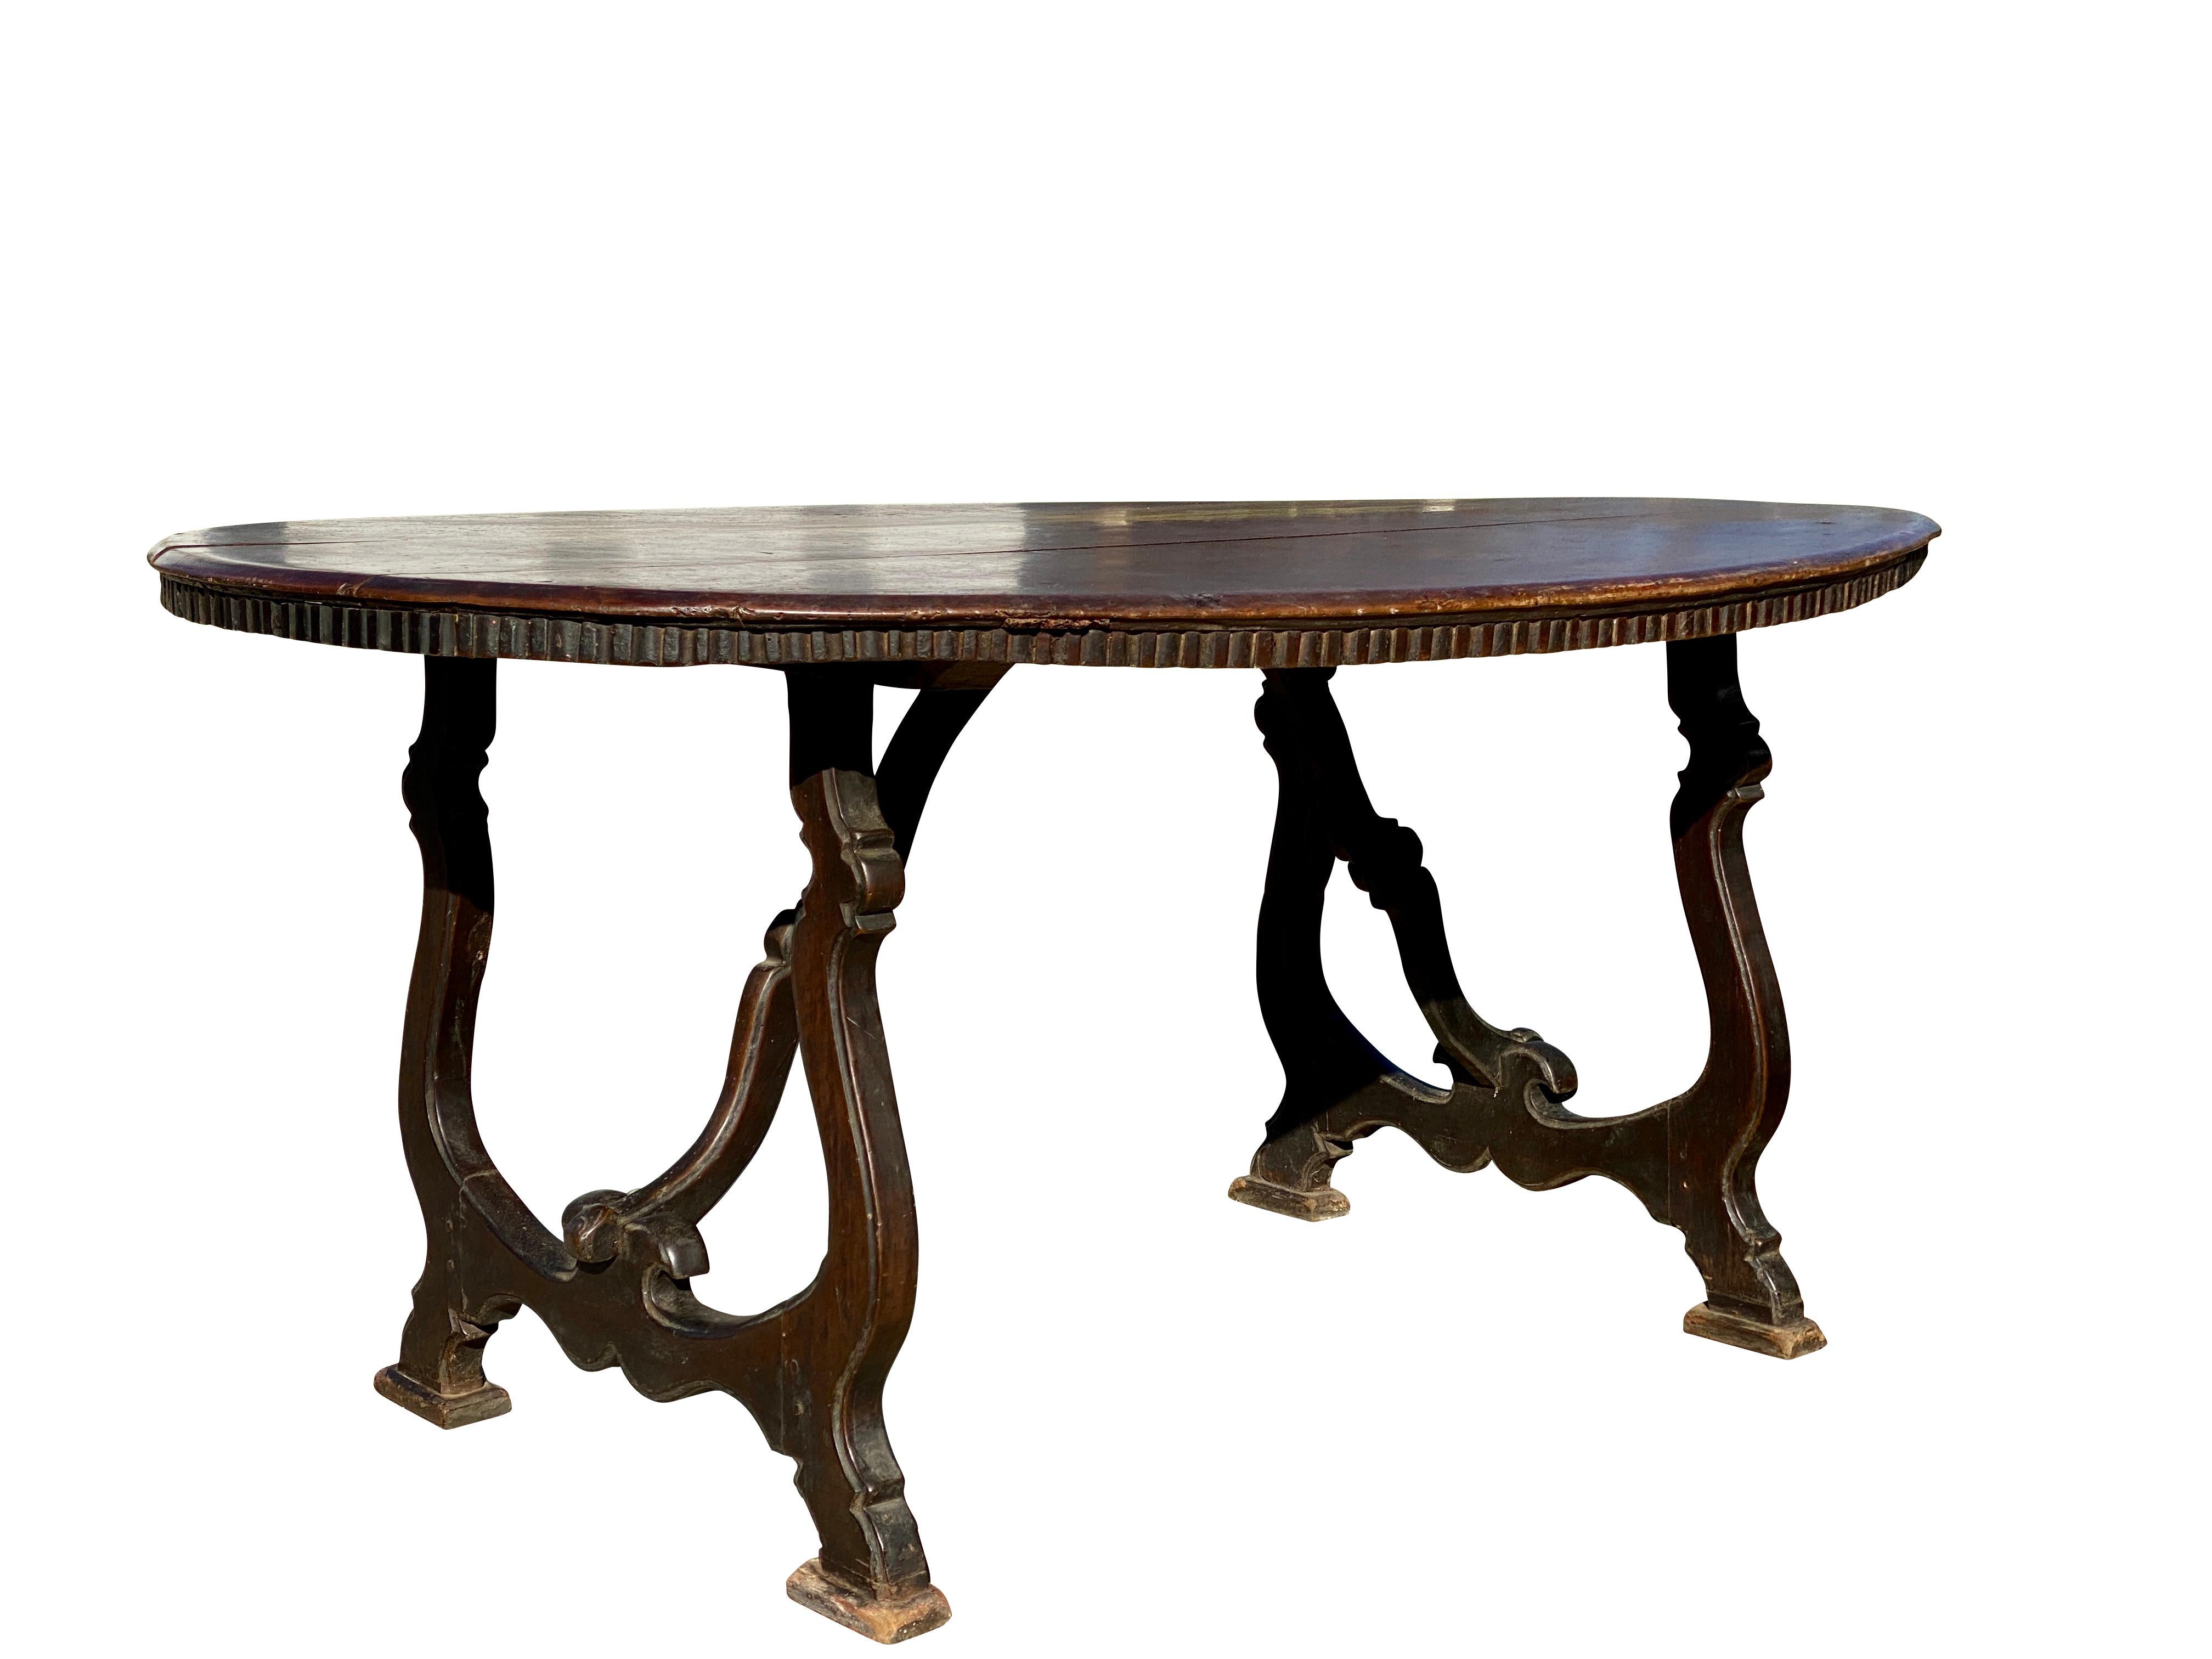 Oval with gadrooned edge with scroll legs joined by scroll stretchers. Unusual hard to find form. Original untouched condition with a fabulous patina.